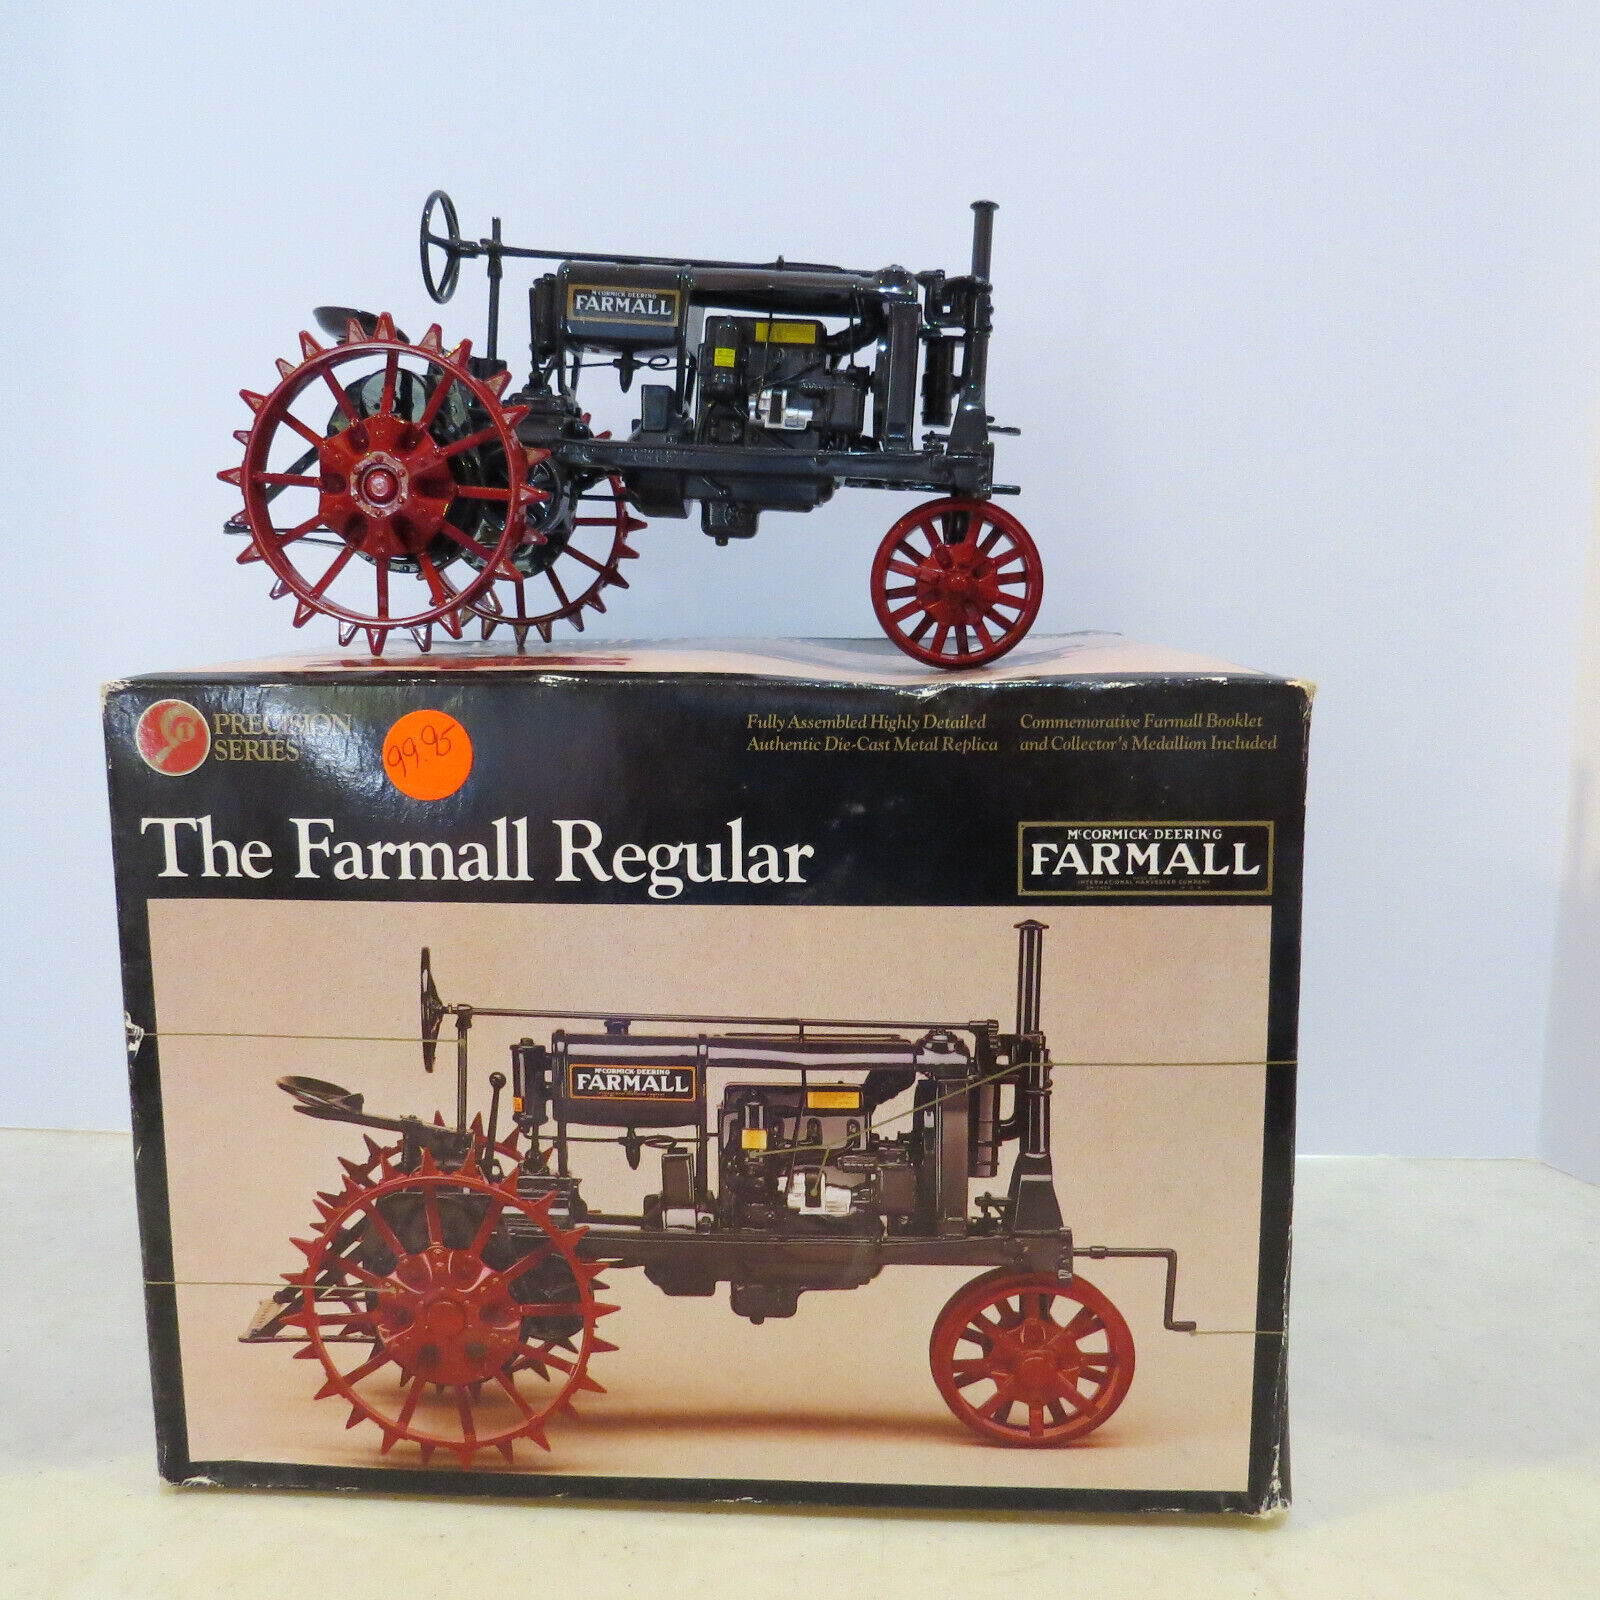 Ertl Farmall Regular Tractor Translated #1 IH-284CO-B 16 Precision Series 1 Some reservation